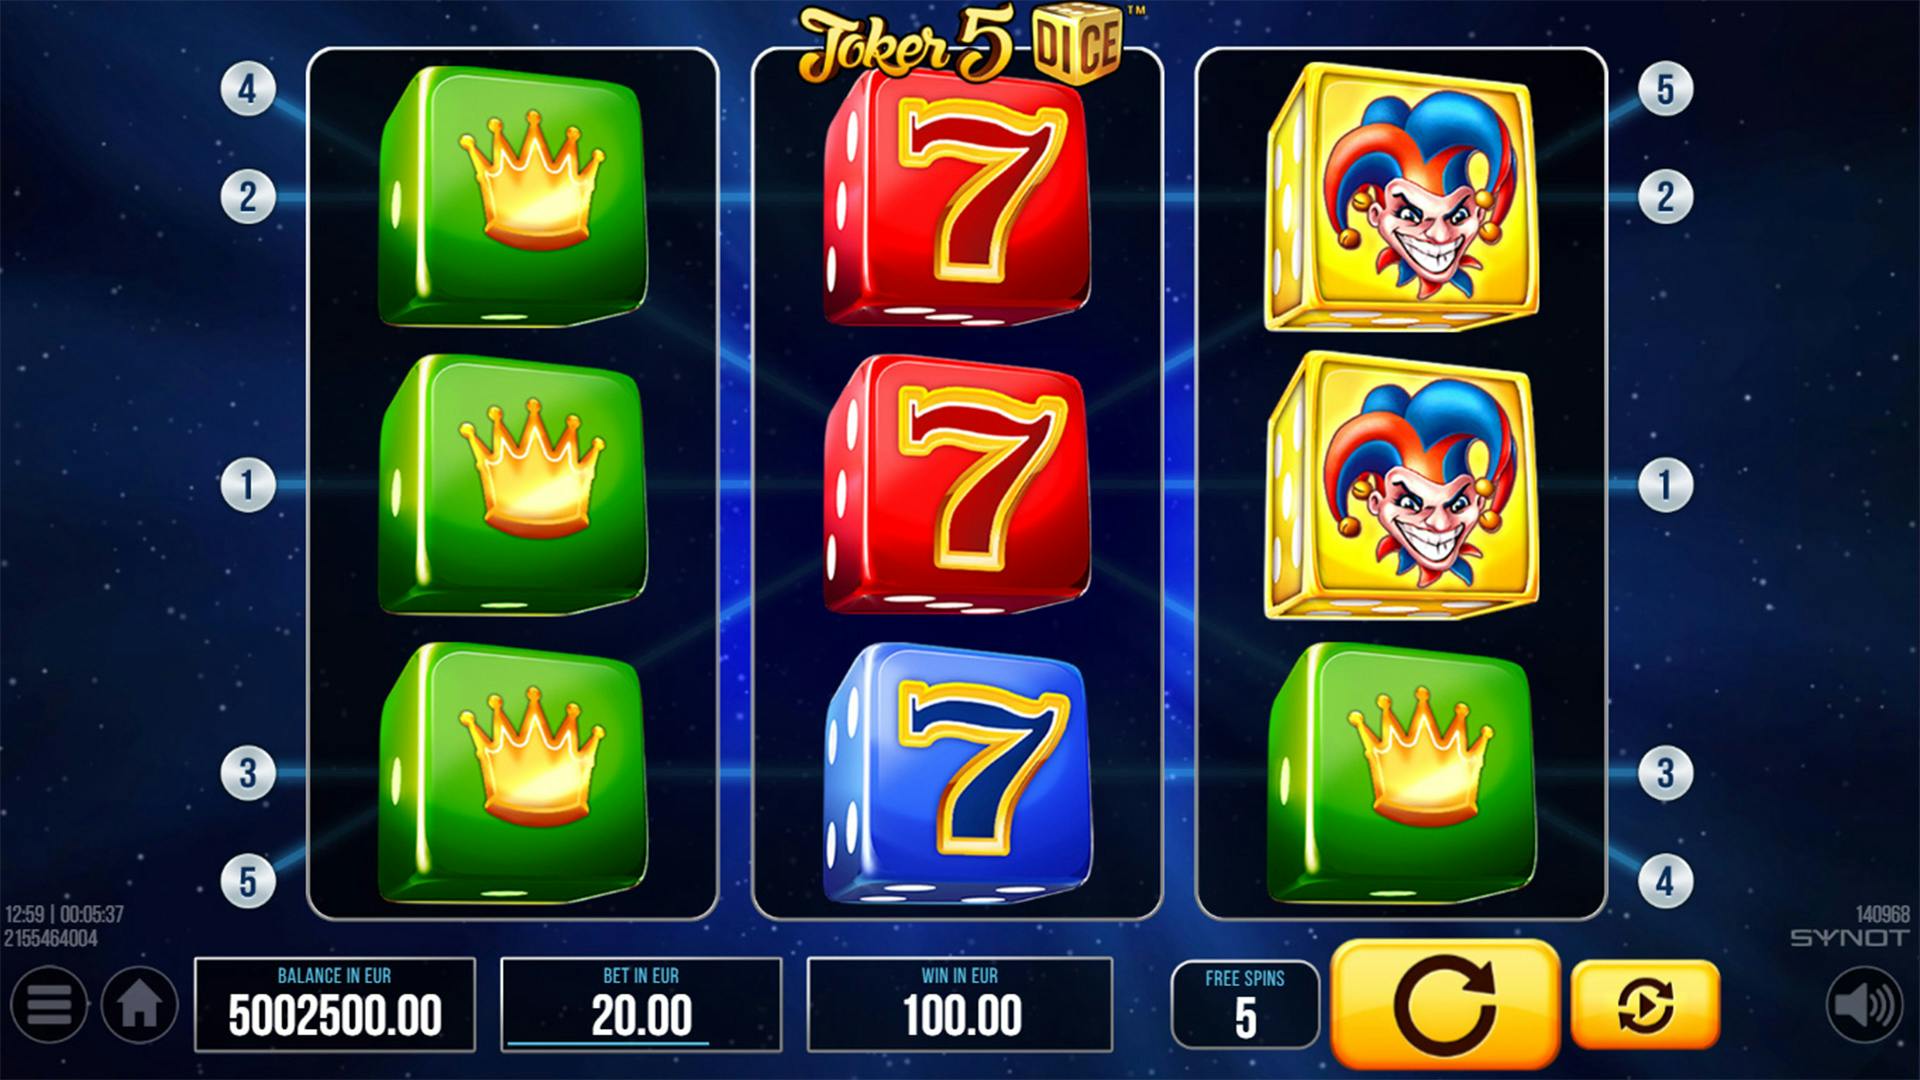 Review of Synot Joker 5 Dice dice slot game